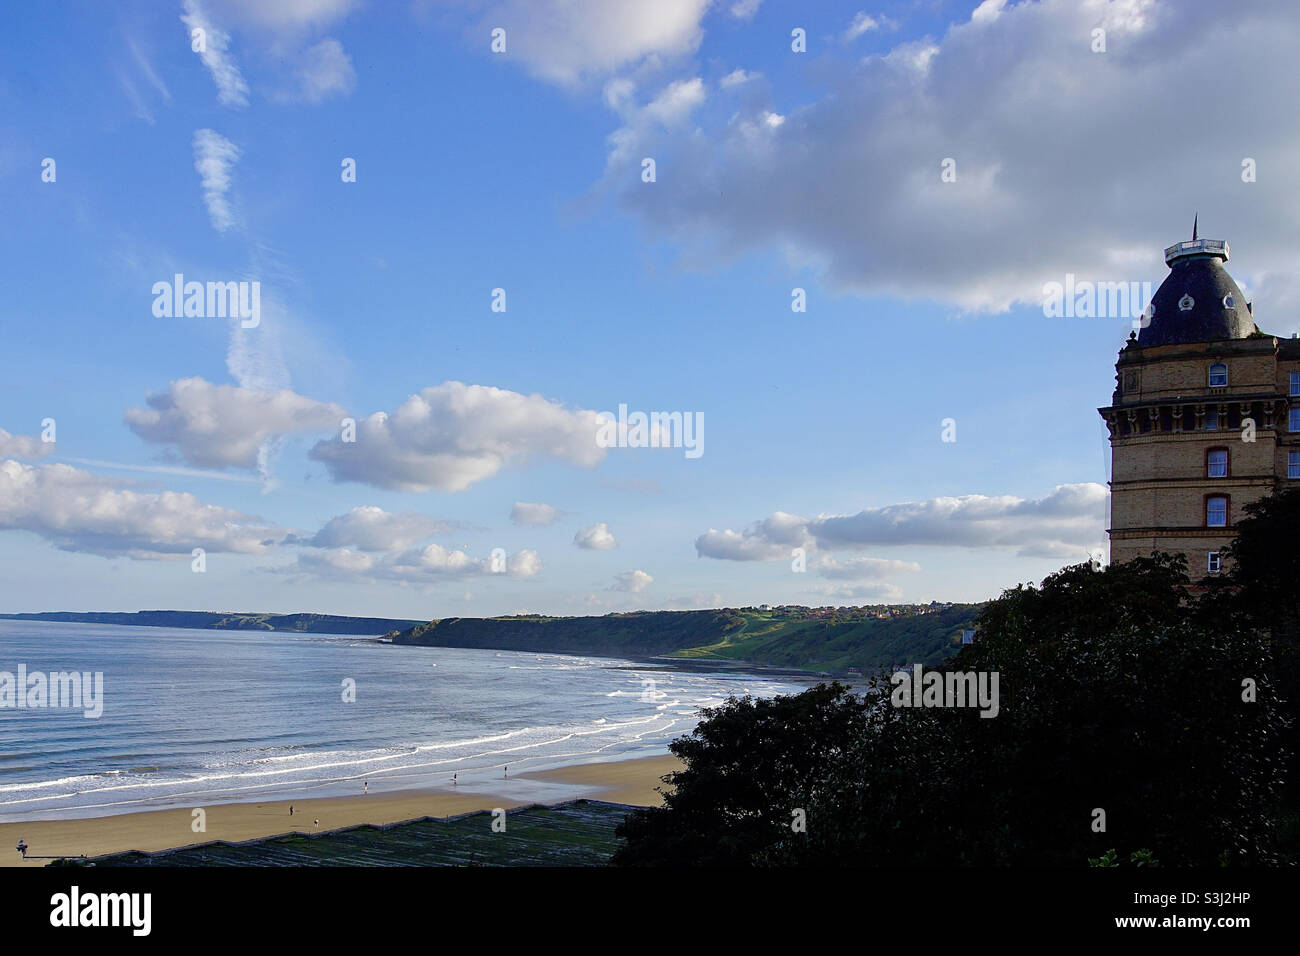 Evening view of Scarborough South Bay sands looking towards Filey and showing part of the Grand Hotel.Scarborough is a popular UK seaside resort developed in Victorian times by use of the railway. Stock Photo